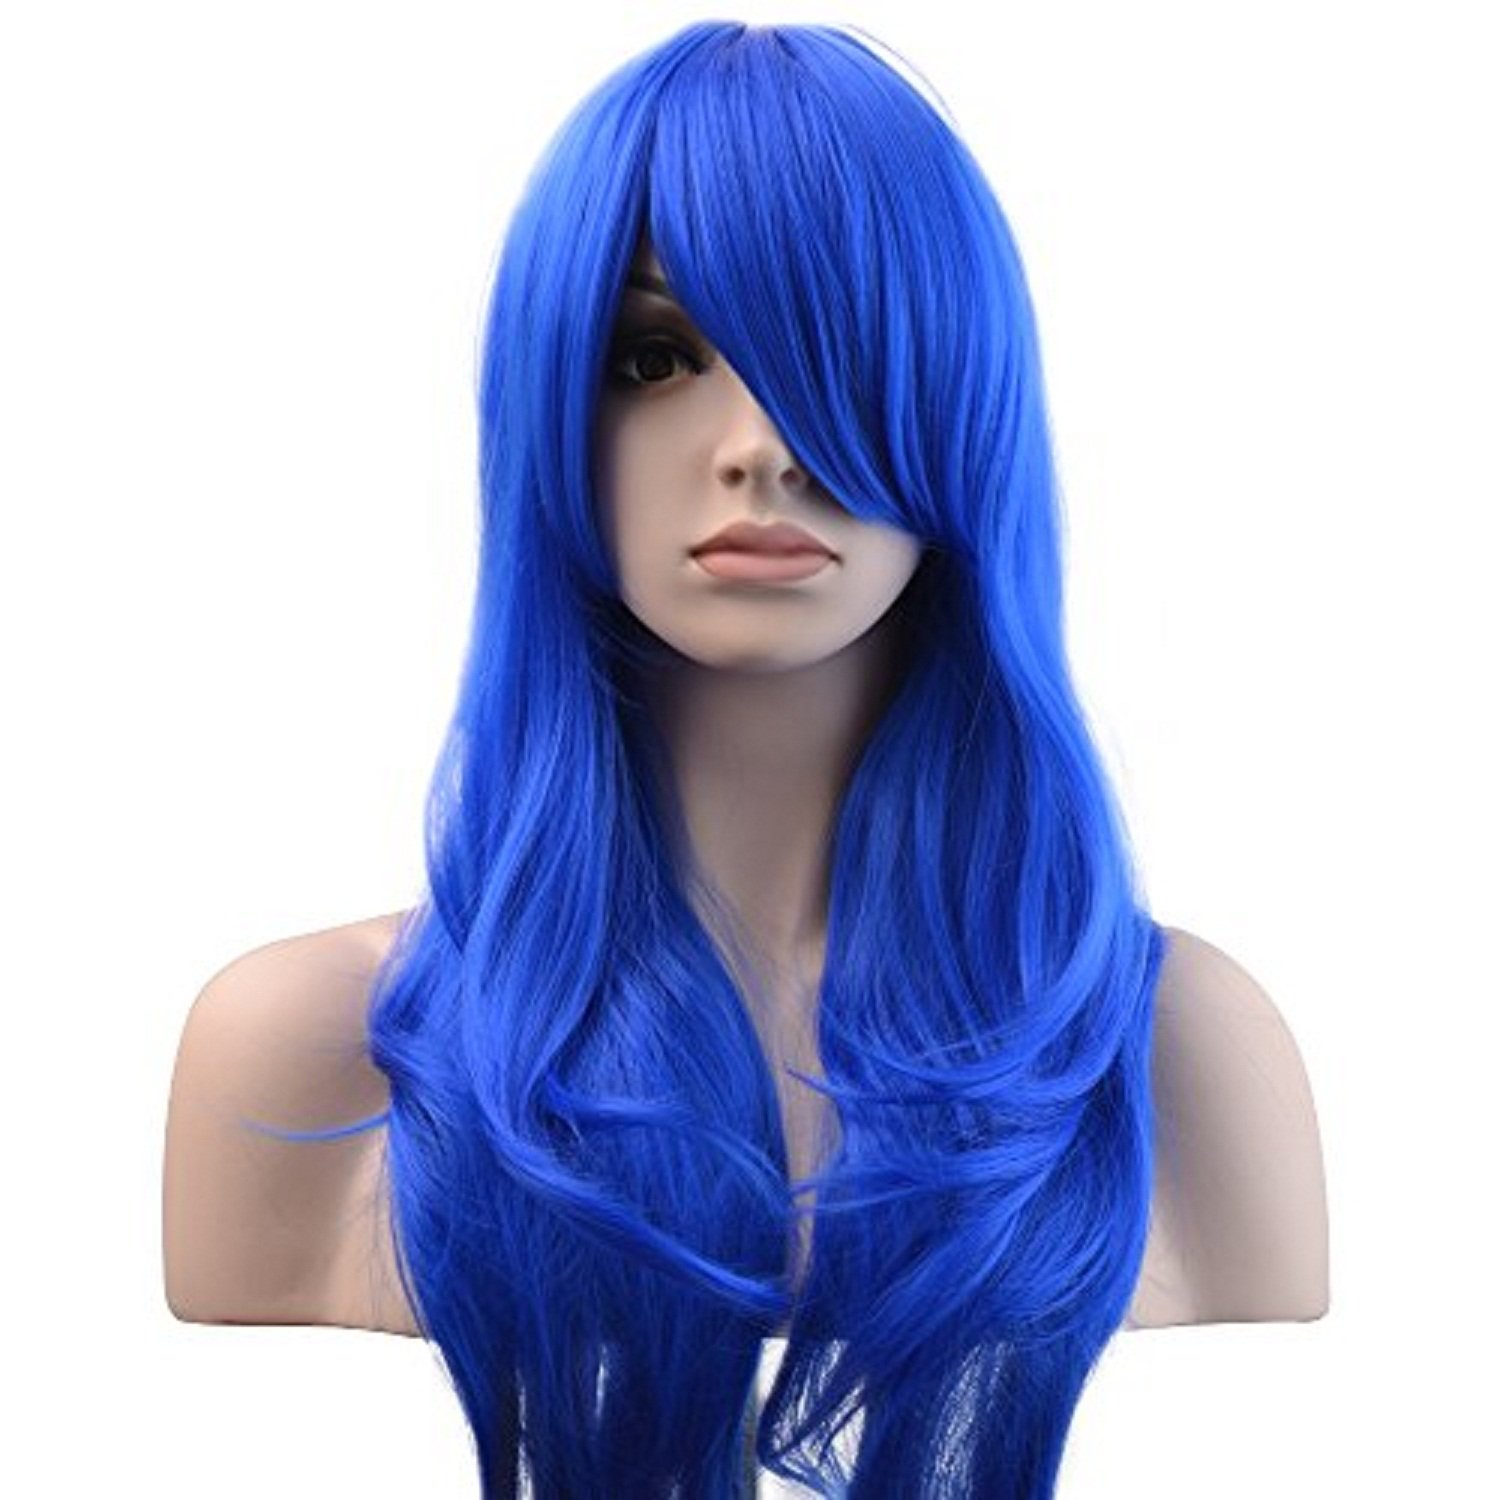 Price:$15.99    YOPO 28" Wig Long Big Wavy Hair Women Cosplay Party Costume Wig(BLue)  Beauty